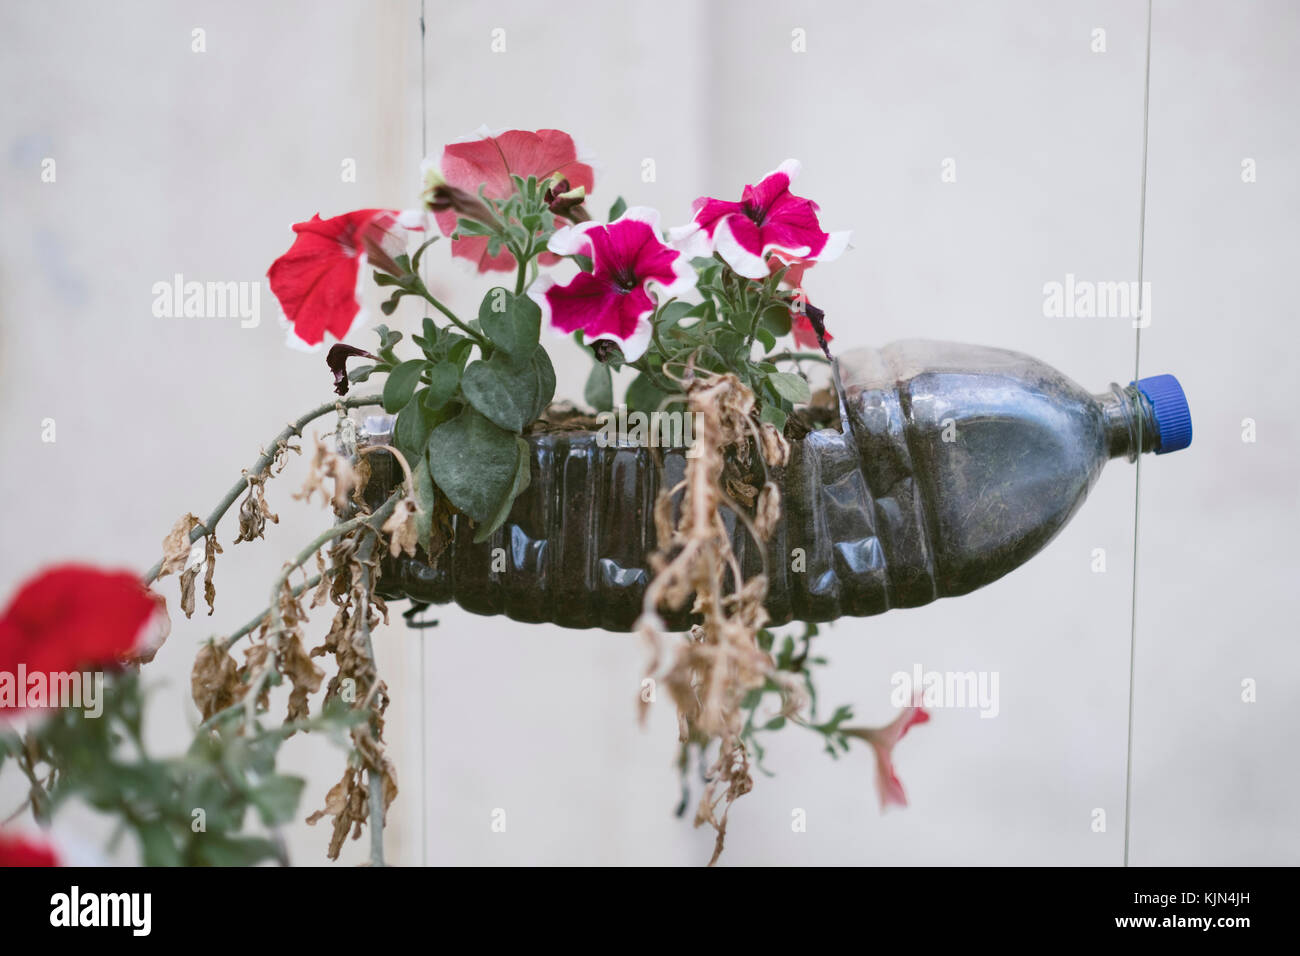 Recycled flower bottle hanging in the street in Sibiu, Romania. Stock Photo